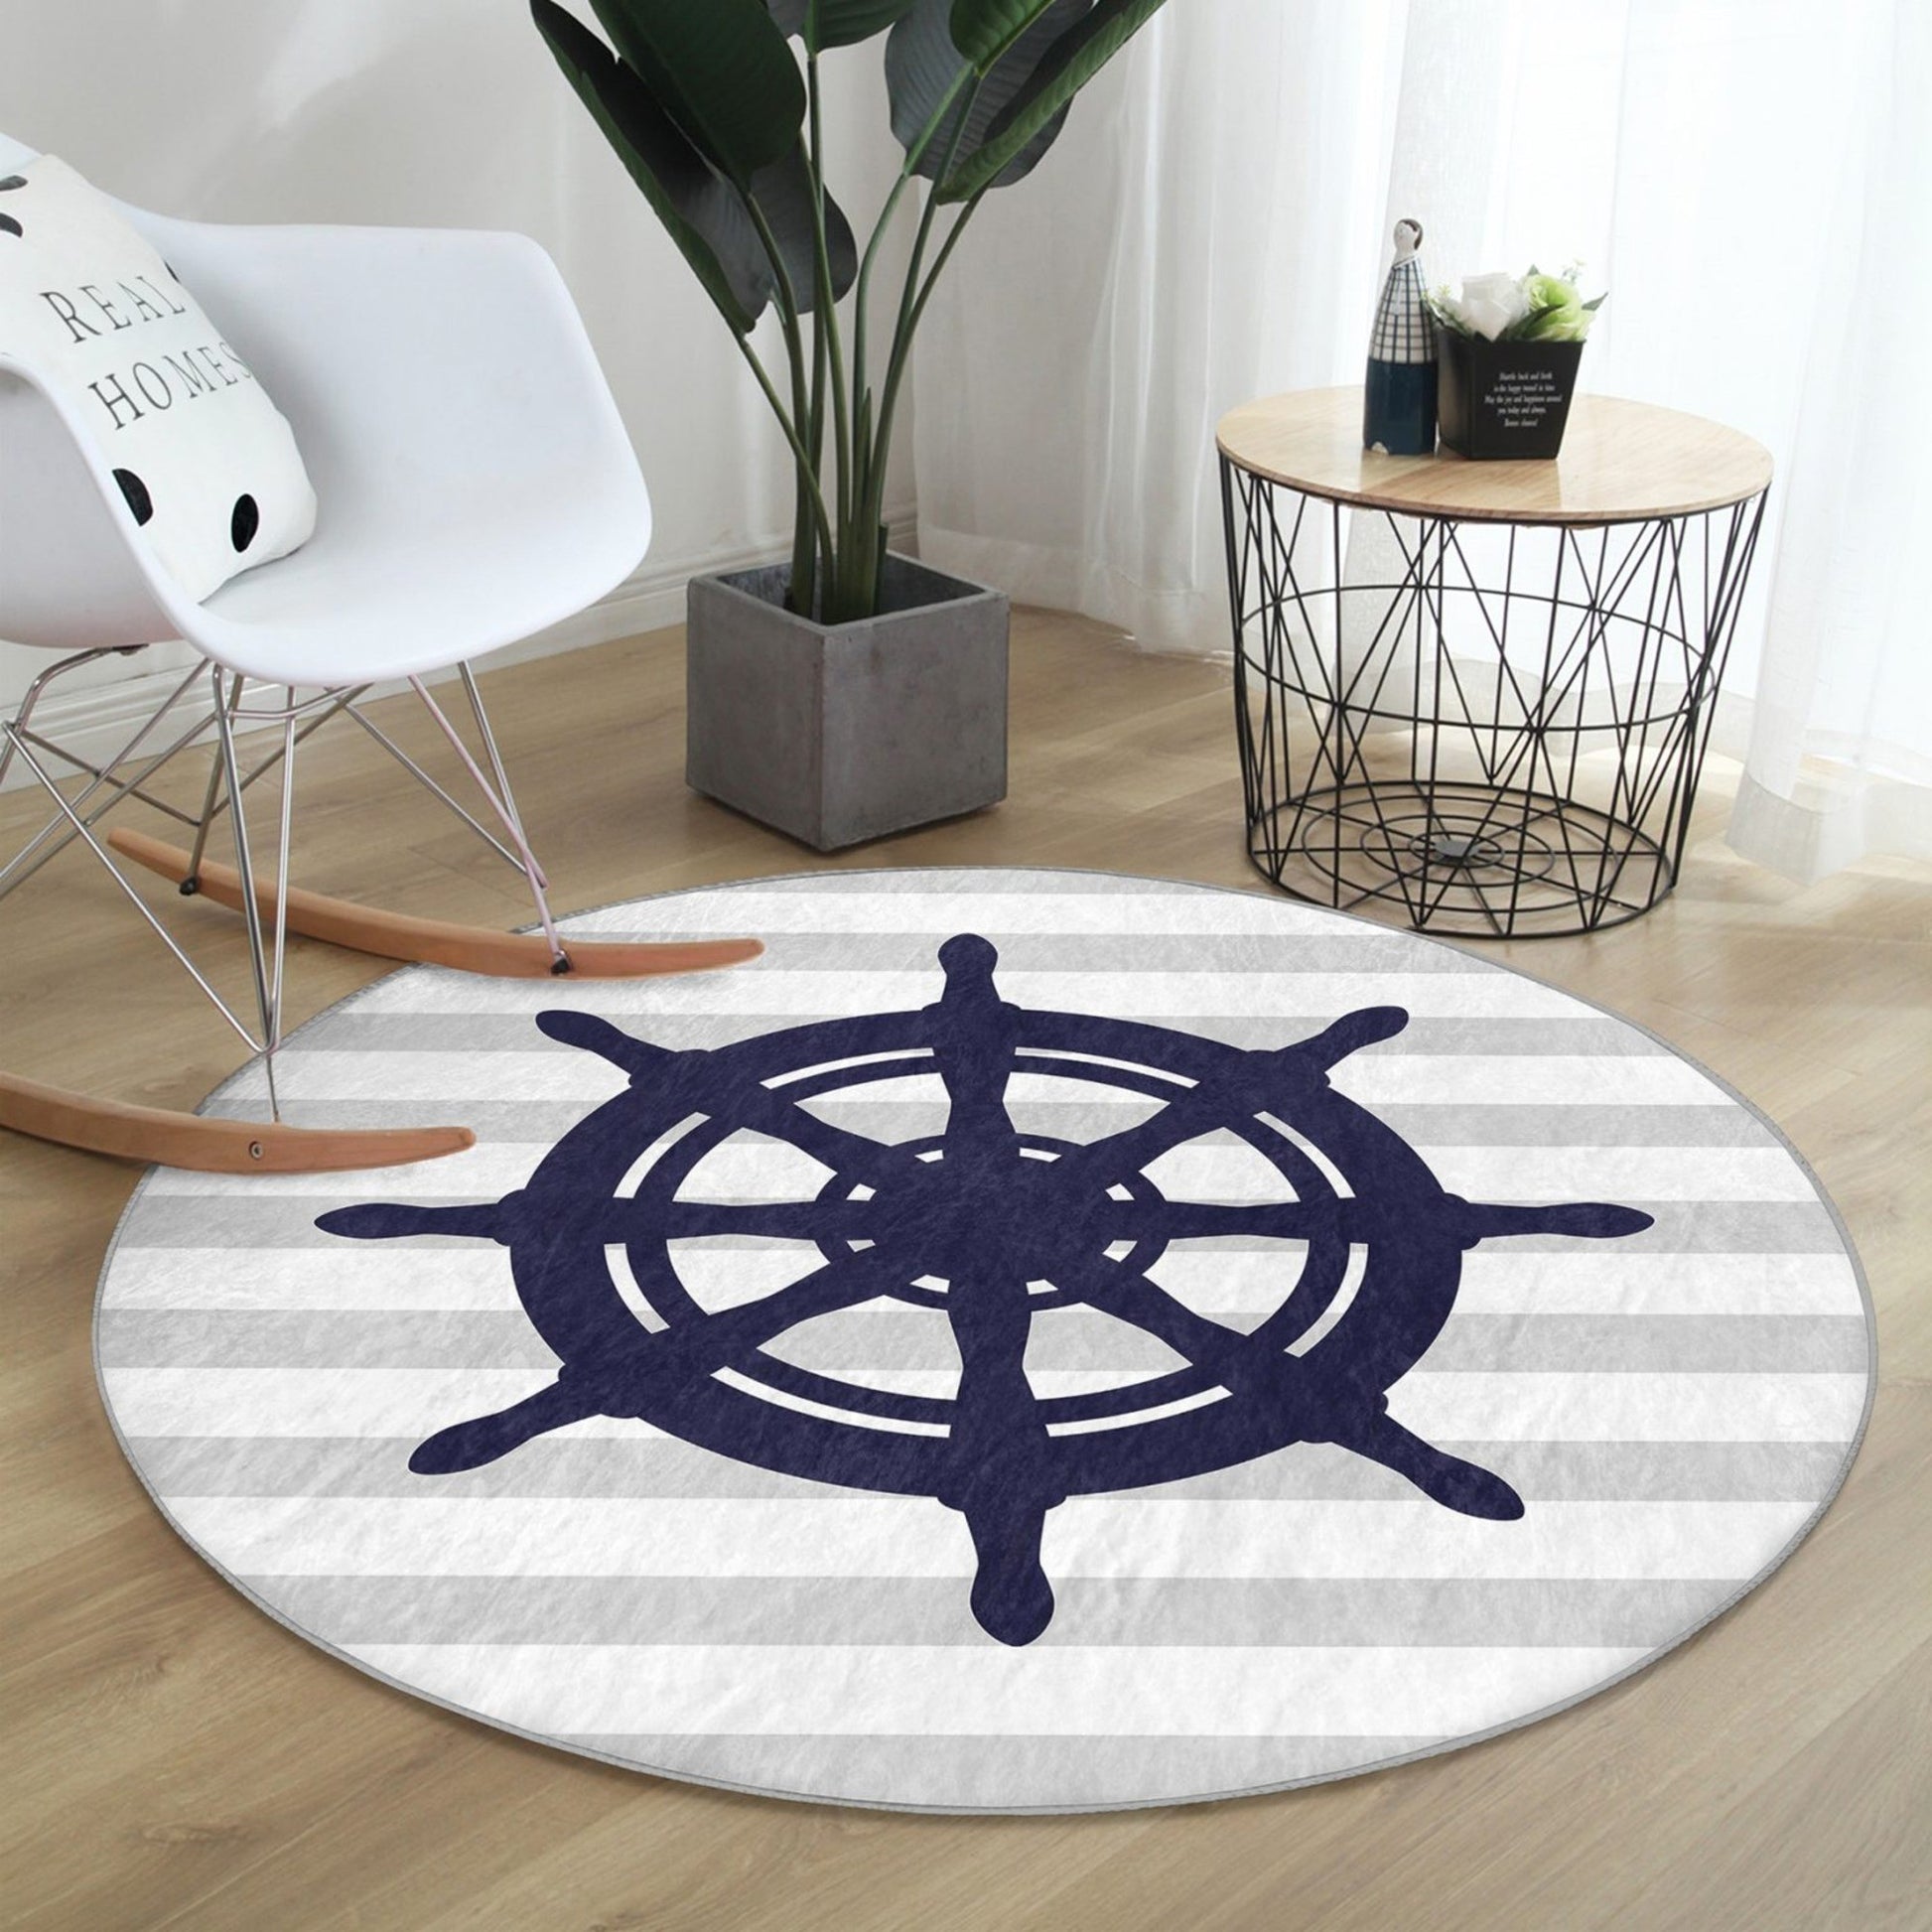 Round Patterned Floor Rug - Marine Ambiance Accent